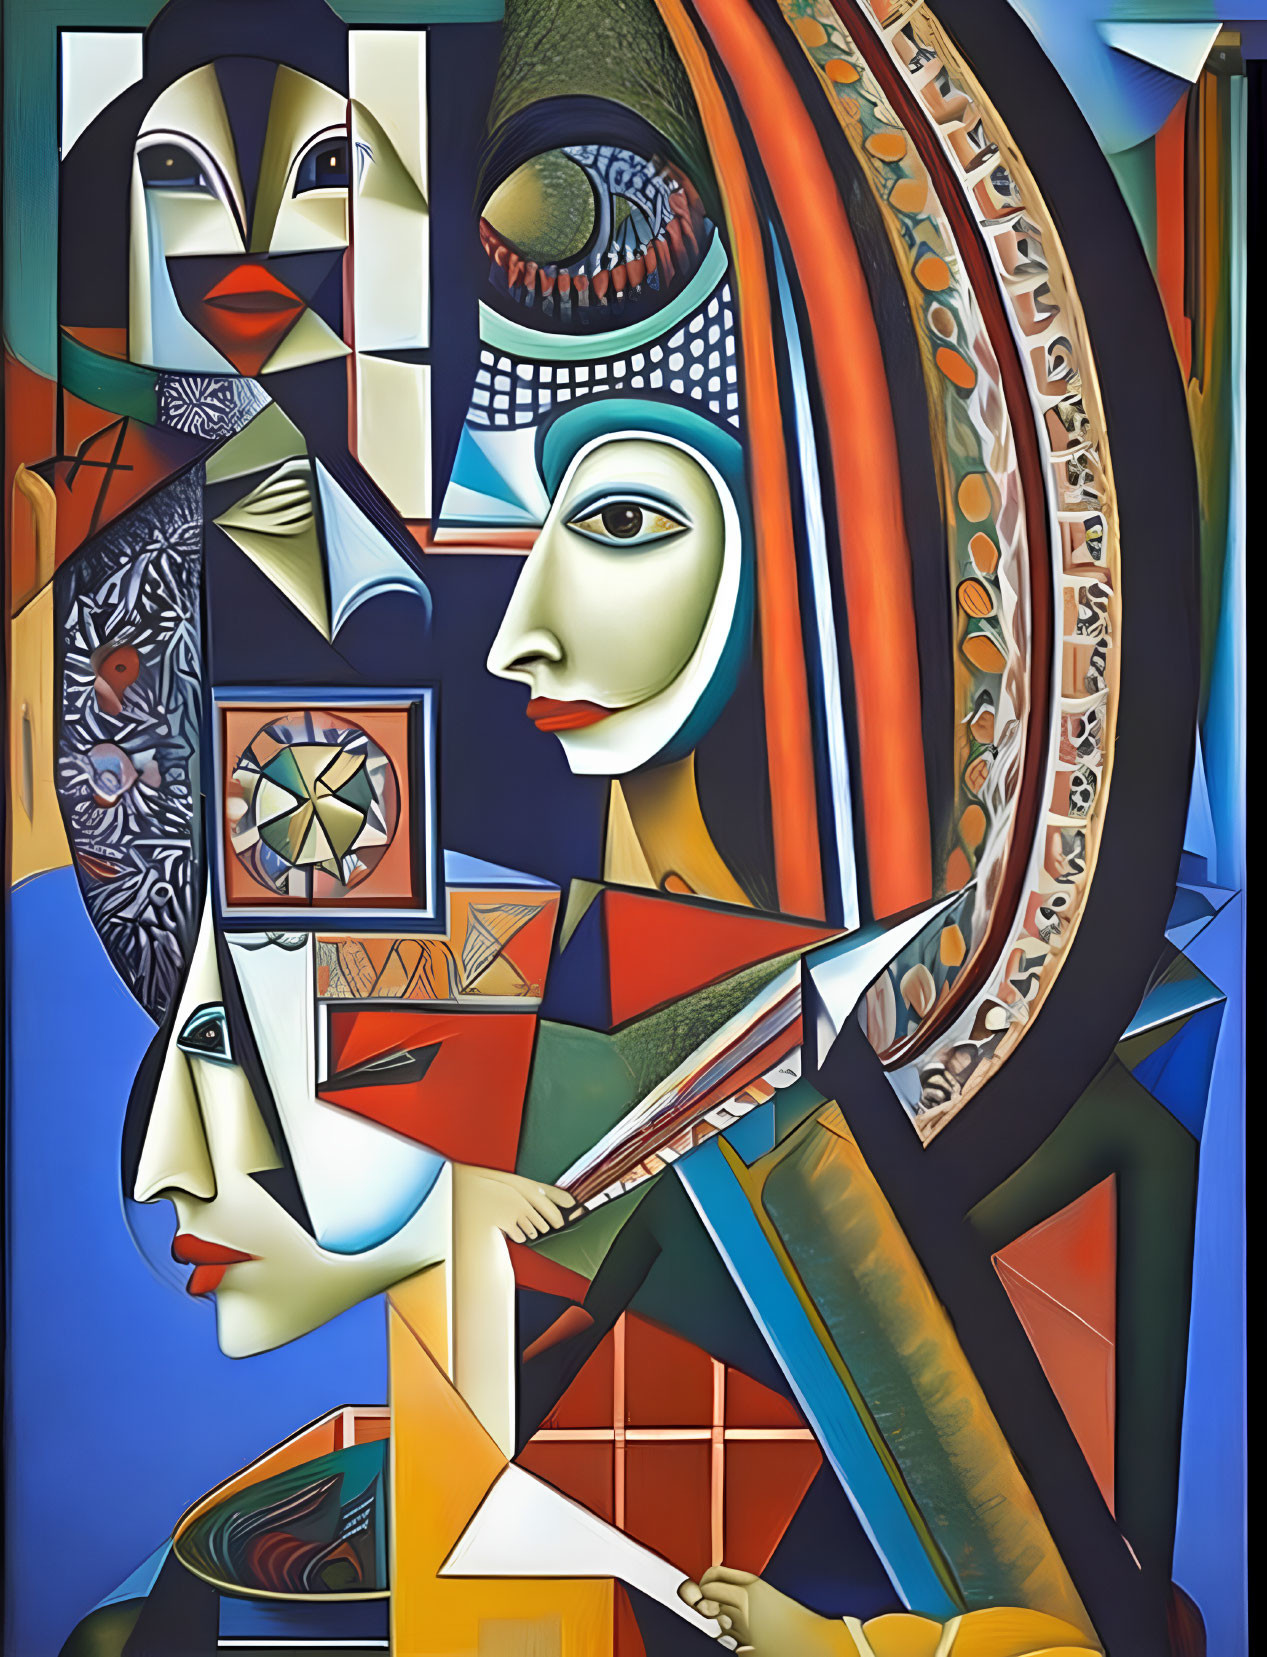 Cubist painting with geometric shapes and overlapping faces